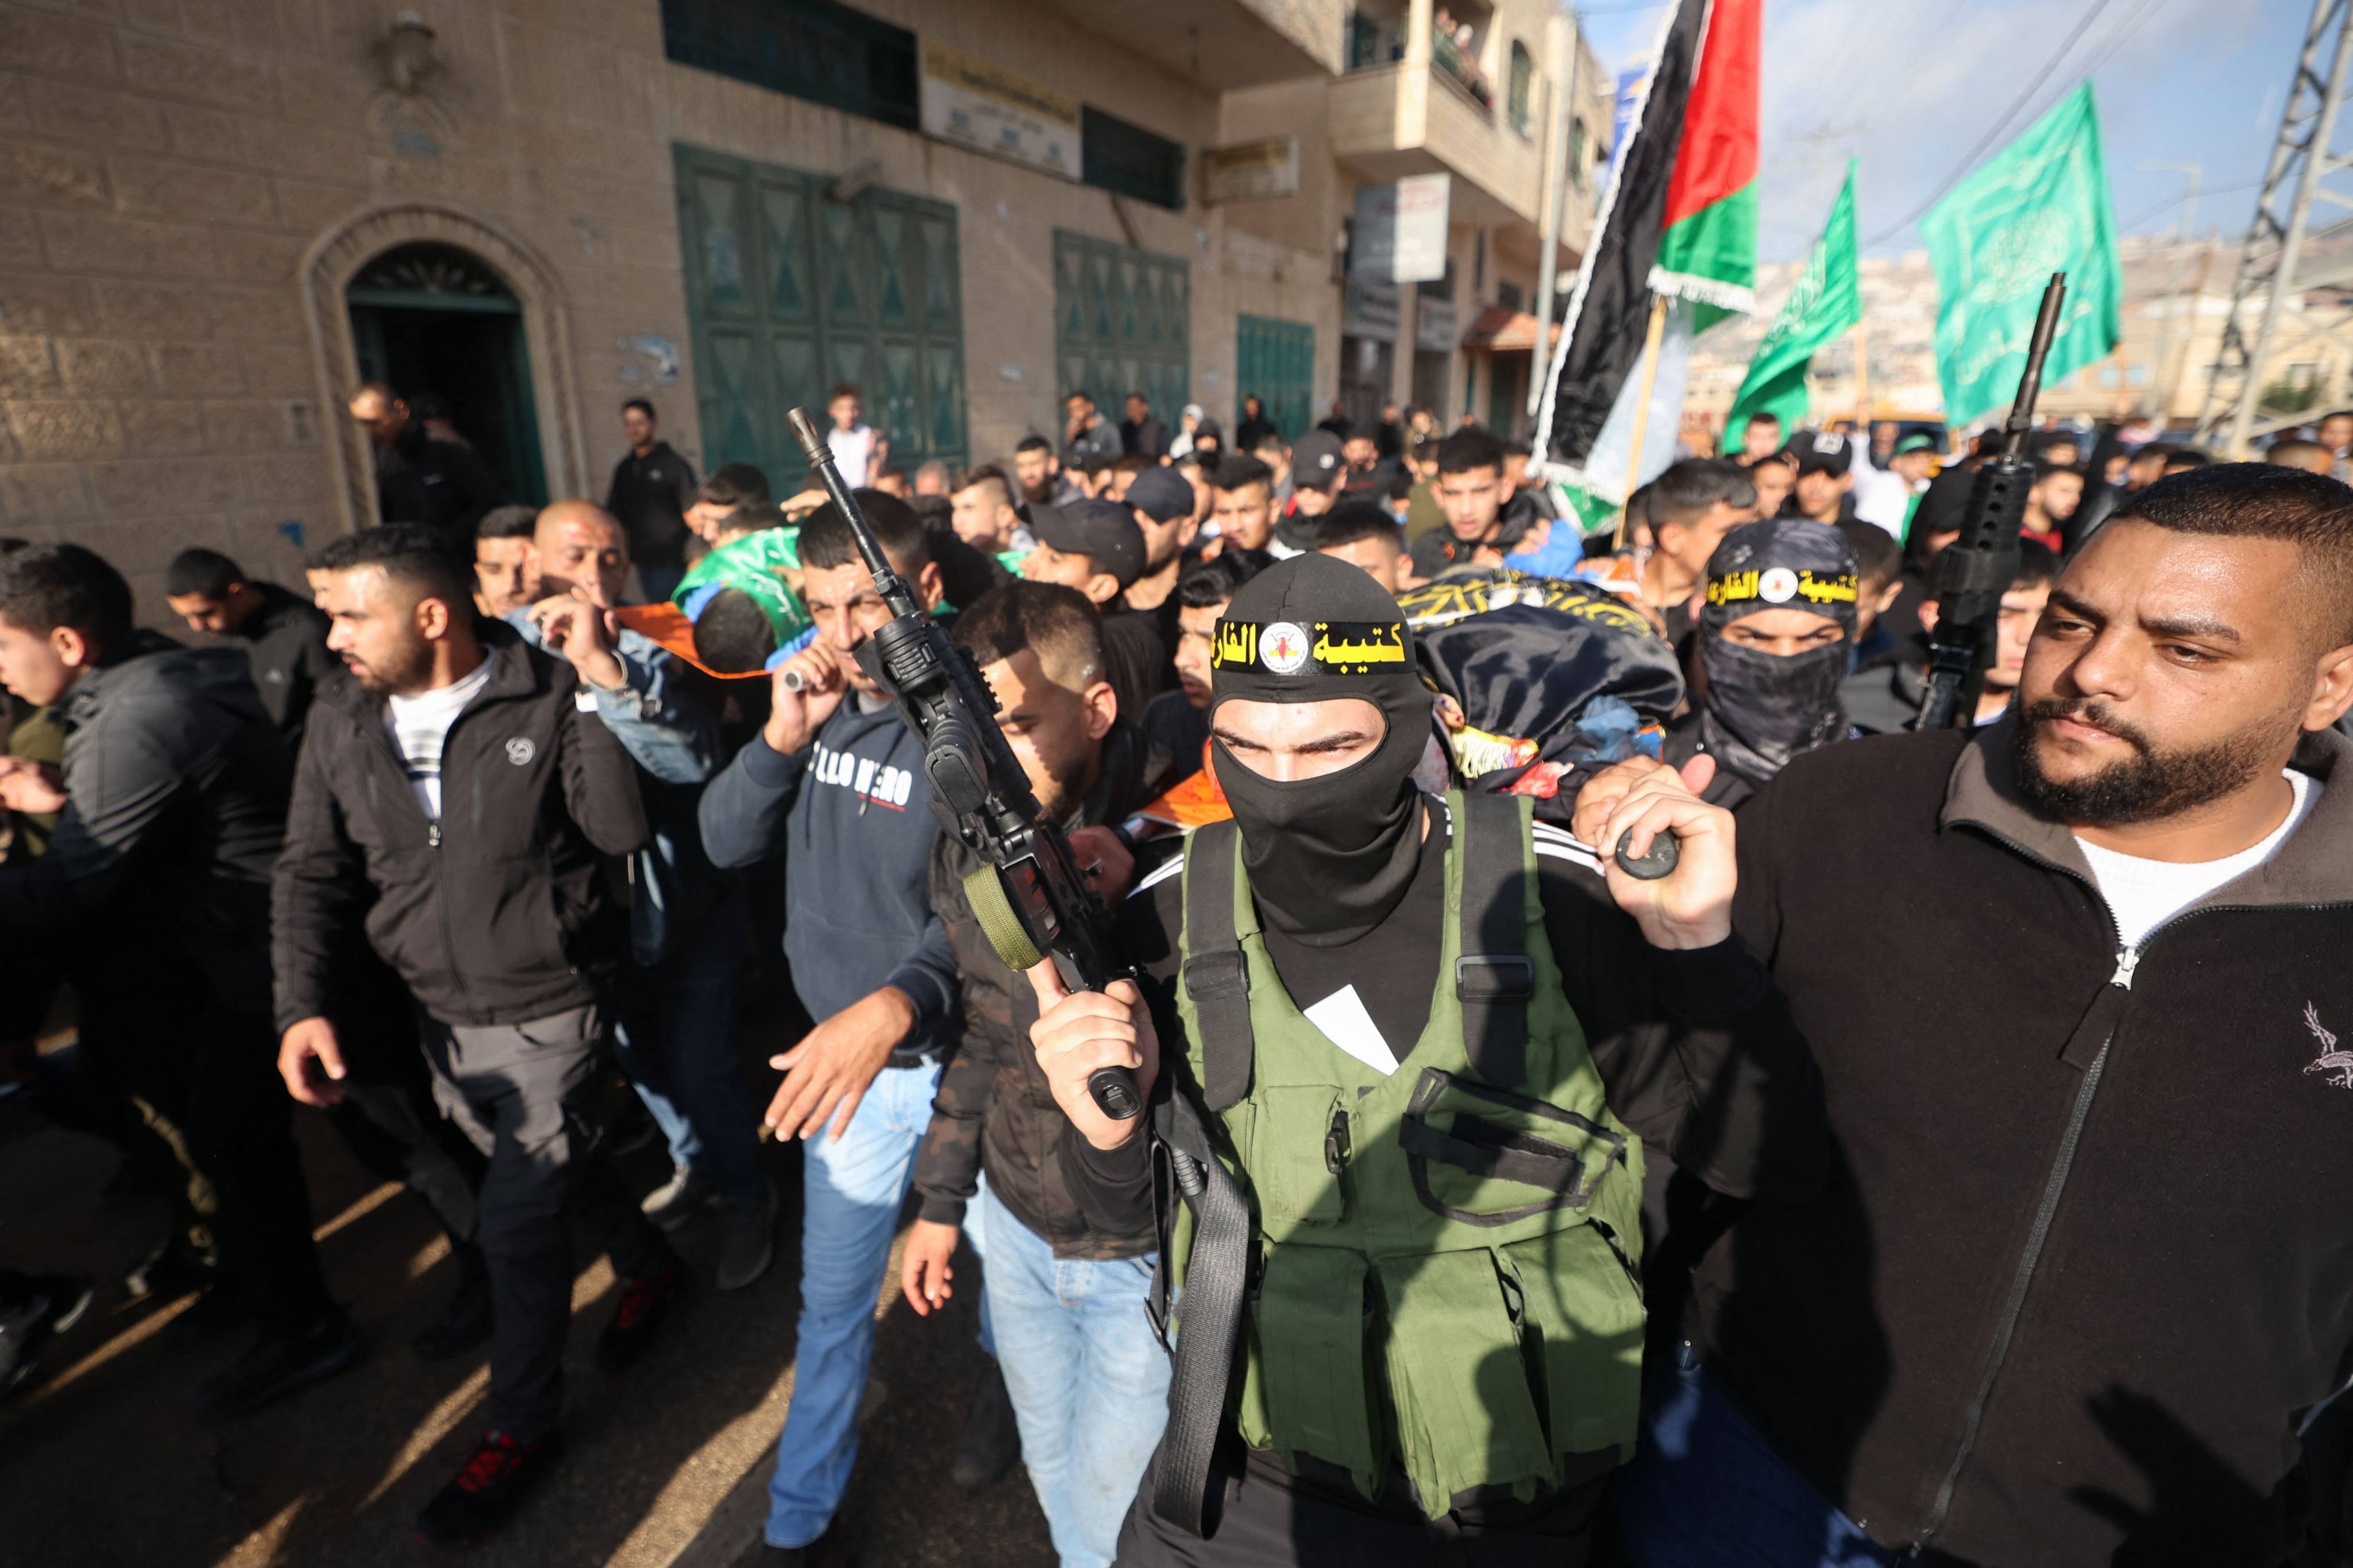 Palestinian mourners and masked armed fighters at a funeral procession of two men who were fatally shot during a raid by Israeli troops in the occupied West Bank, on December 6 in the village of Tubas. Photo: AFP